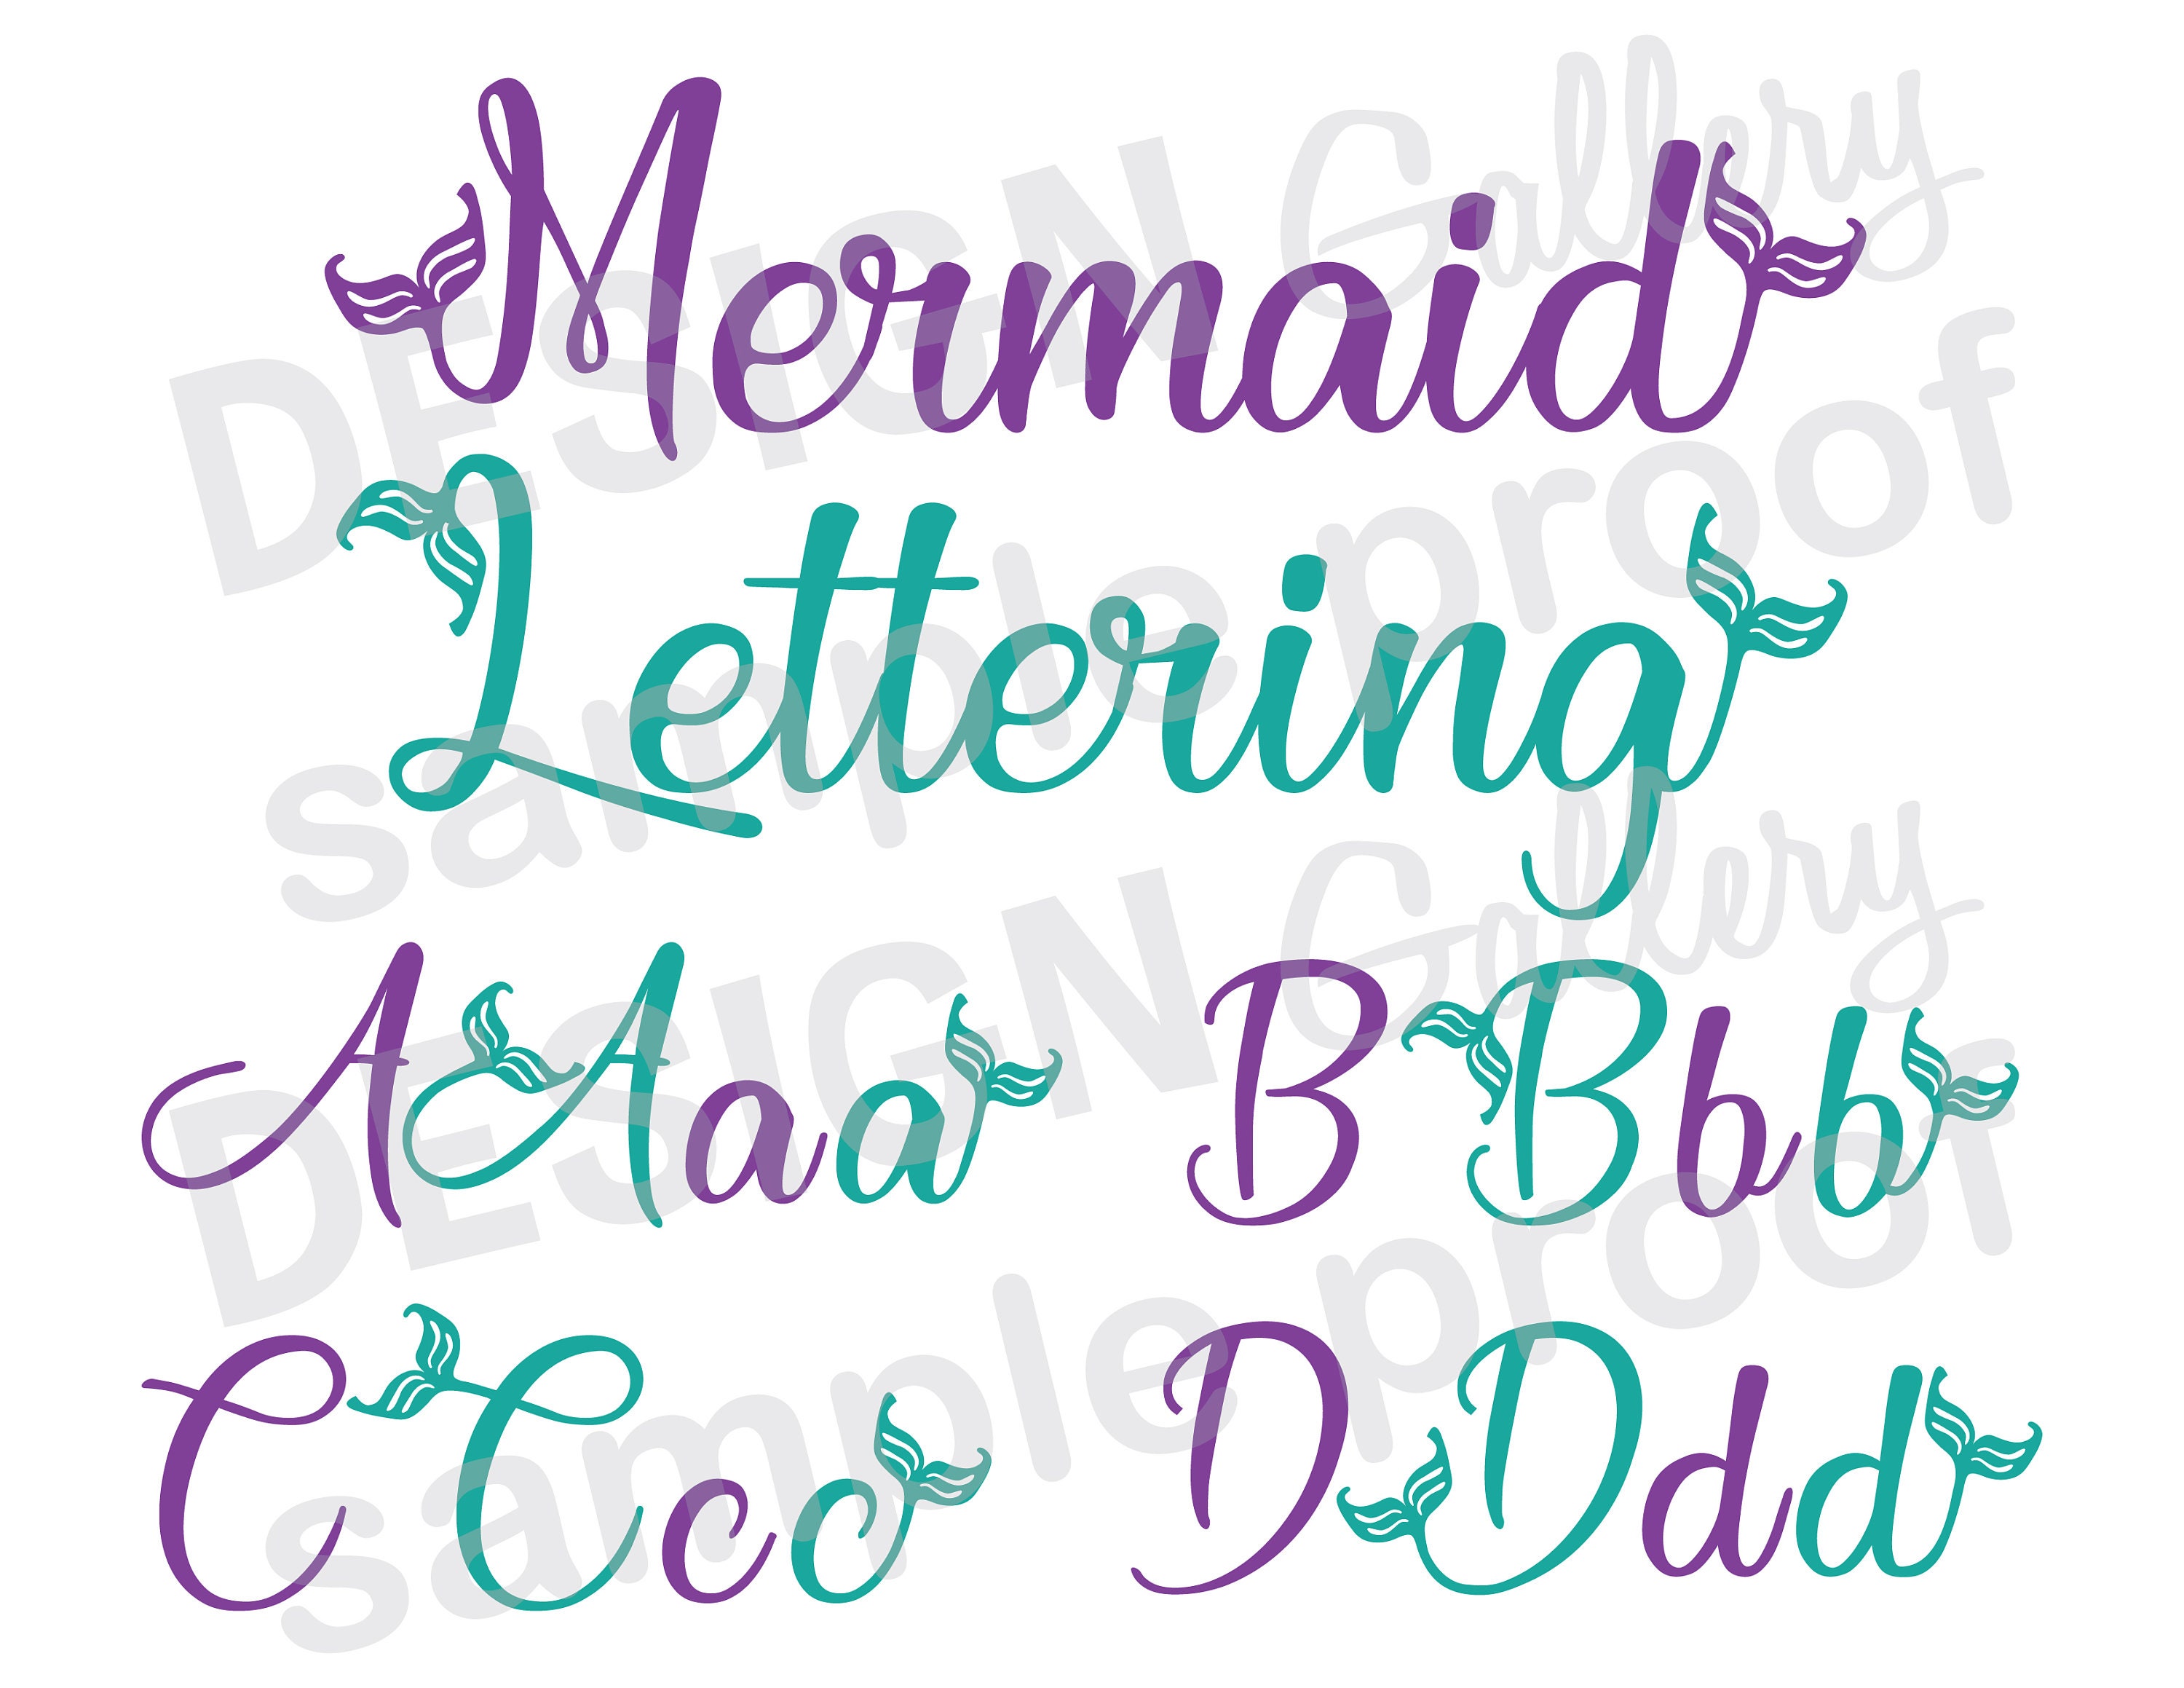 Mermaid Letters Alphabet SVG DXF cut files & PNG image | Etsy